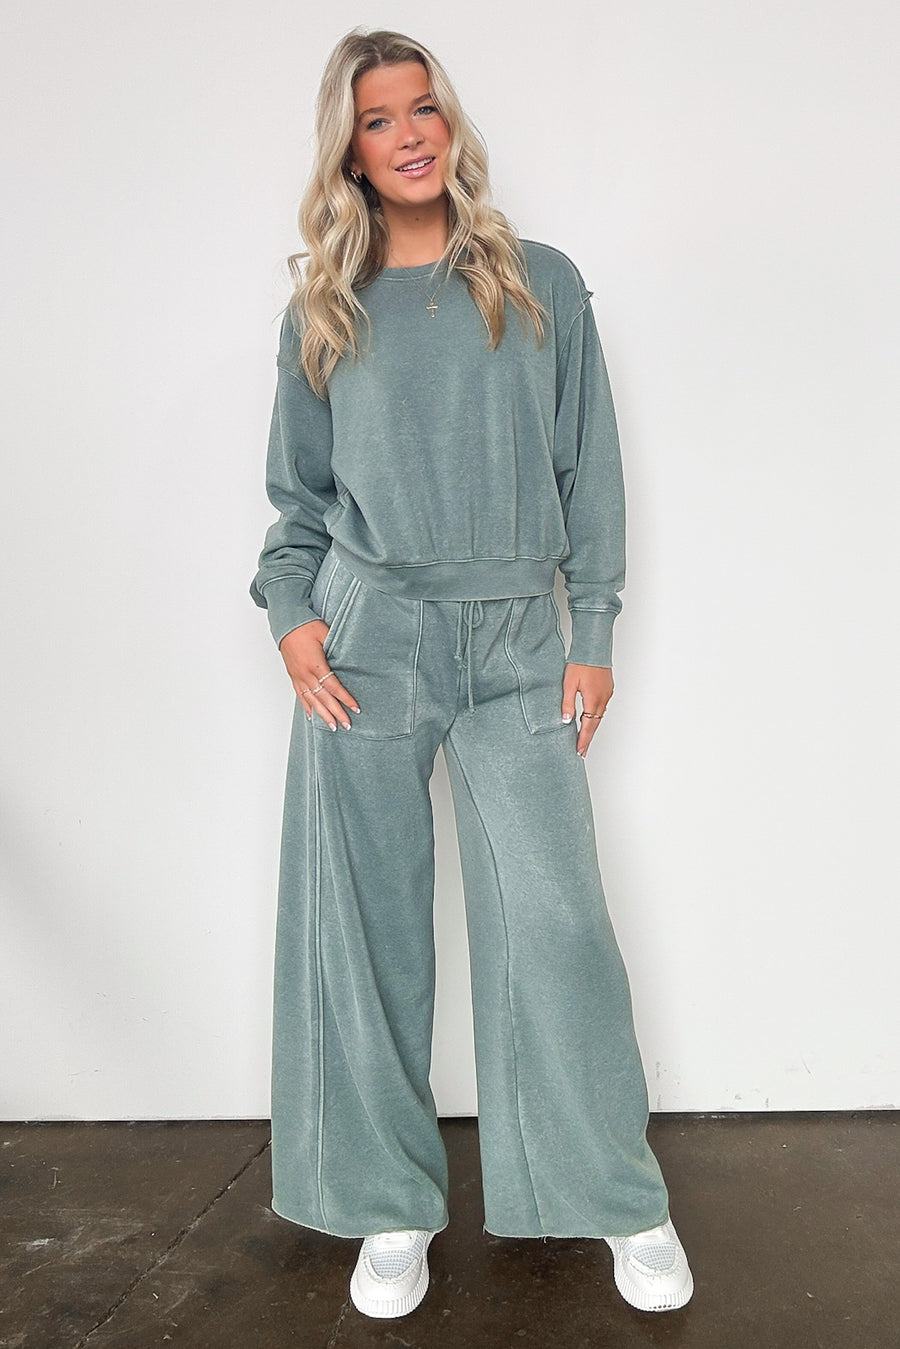 Gray Green / S Rest Day Exposed Seam Sweatshirt - Madison and Mallory